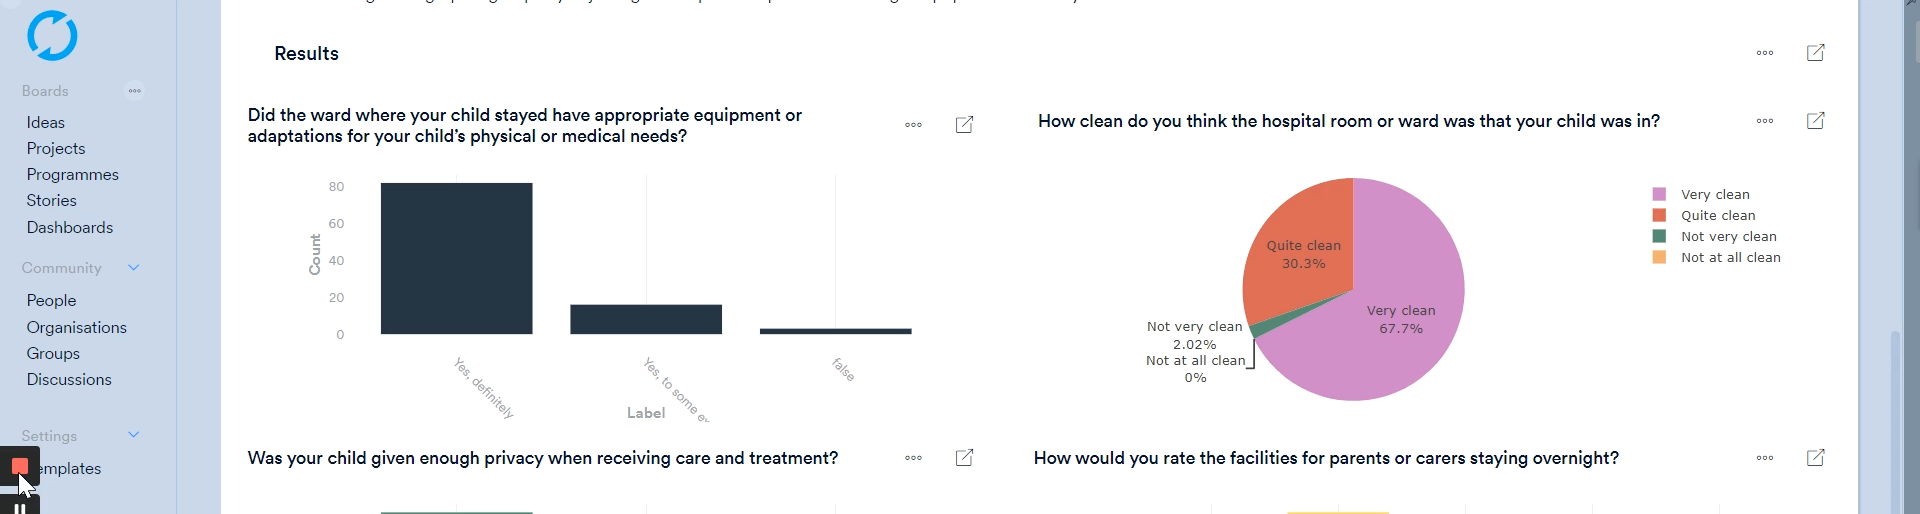 Charting your survey results